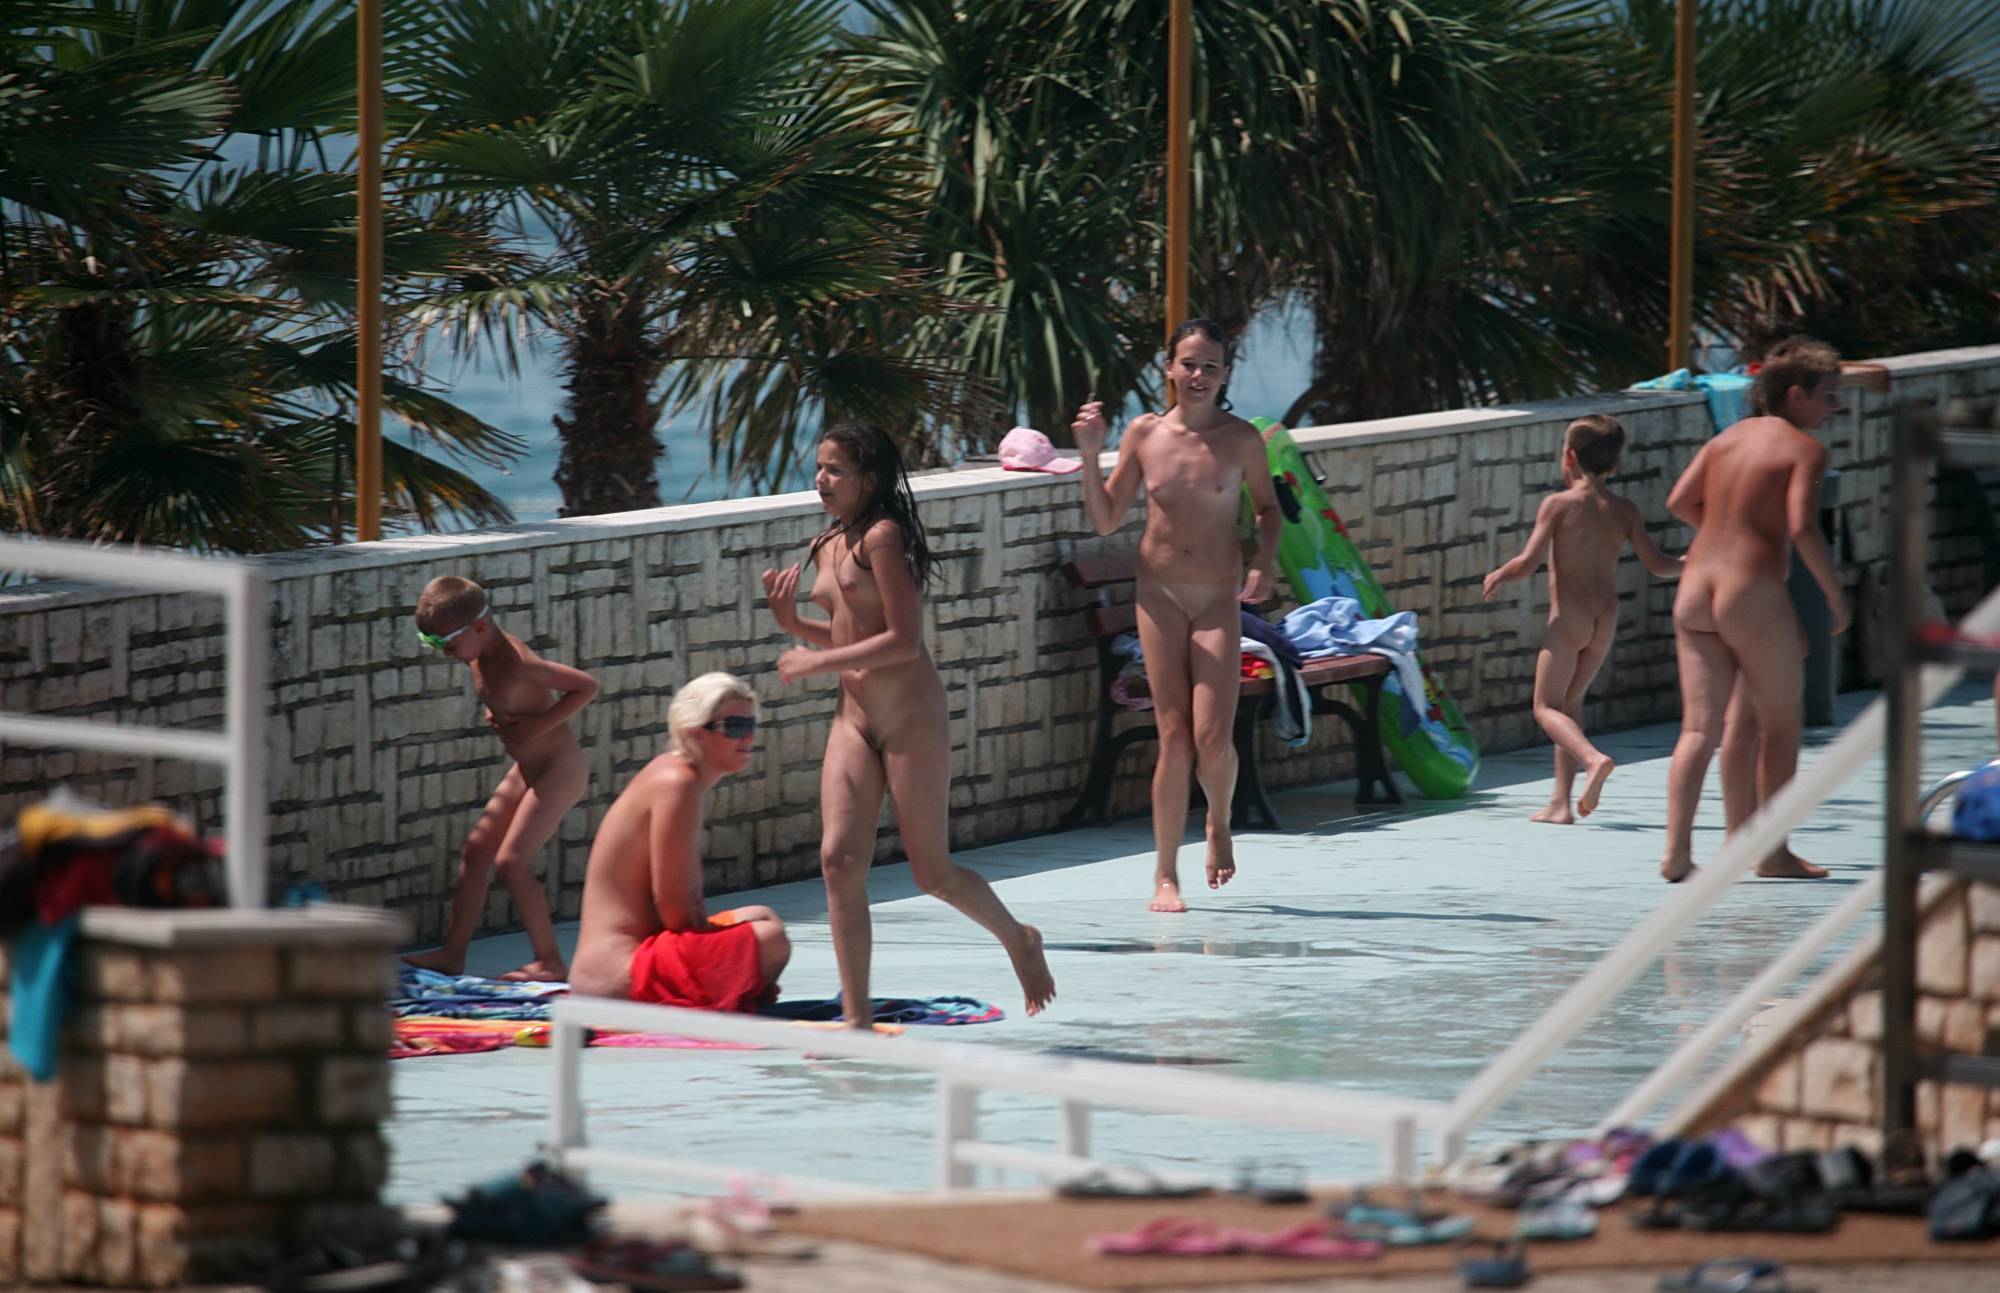 Nudist Pics From the Pool to Walkway - 1